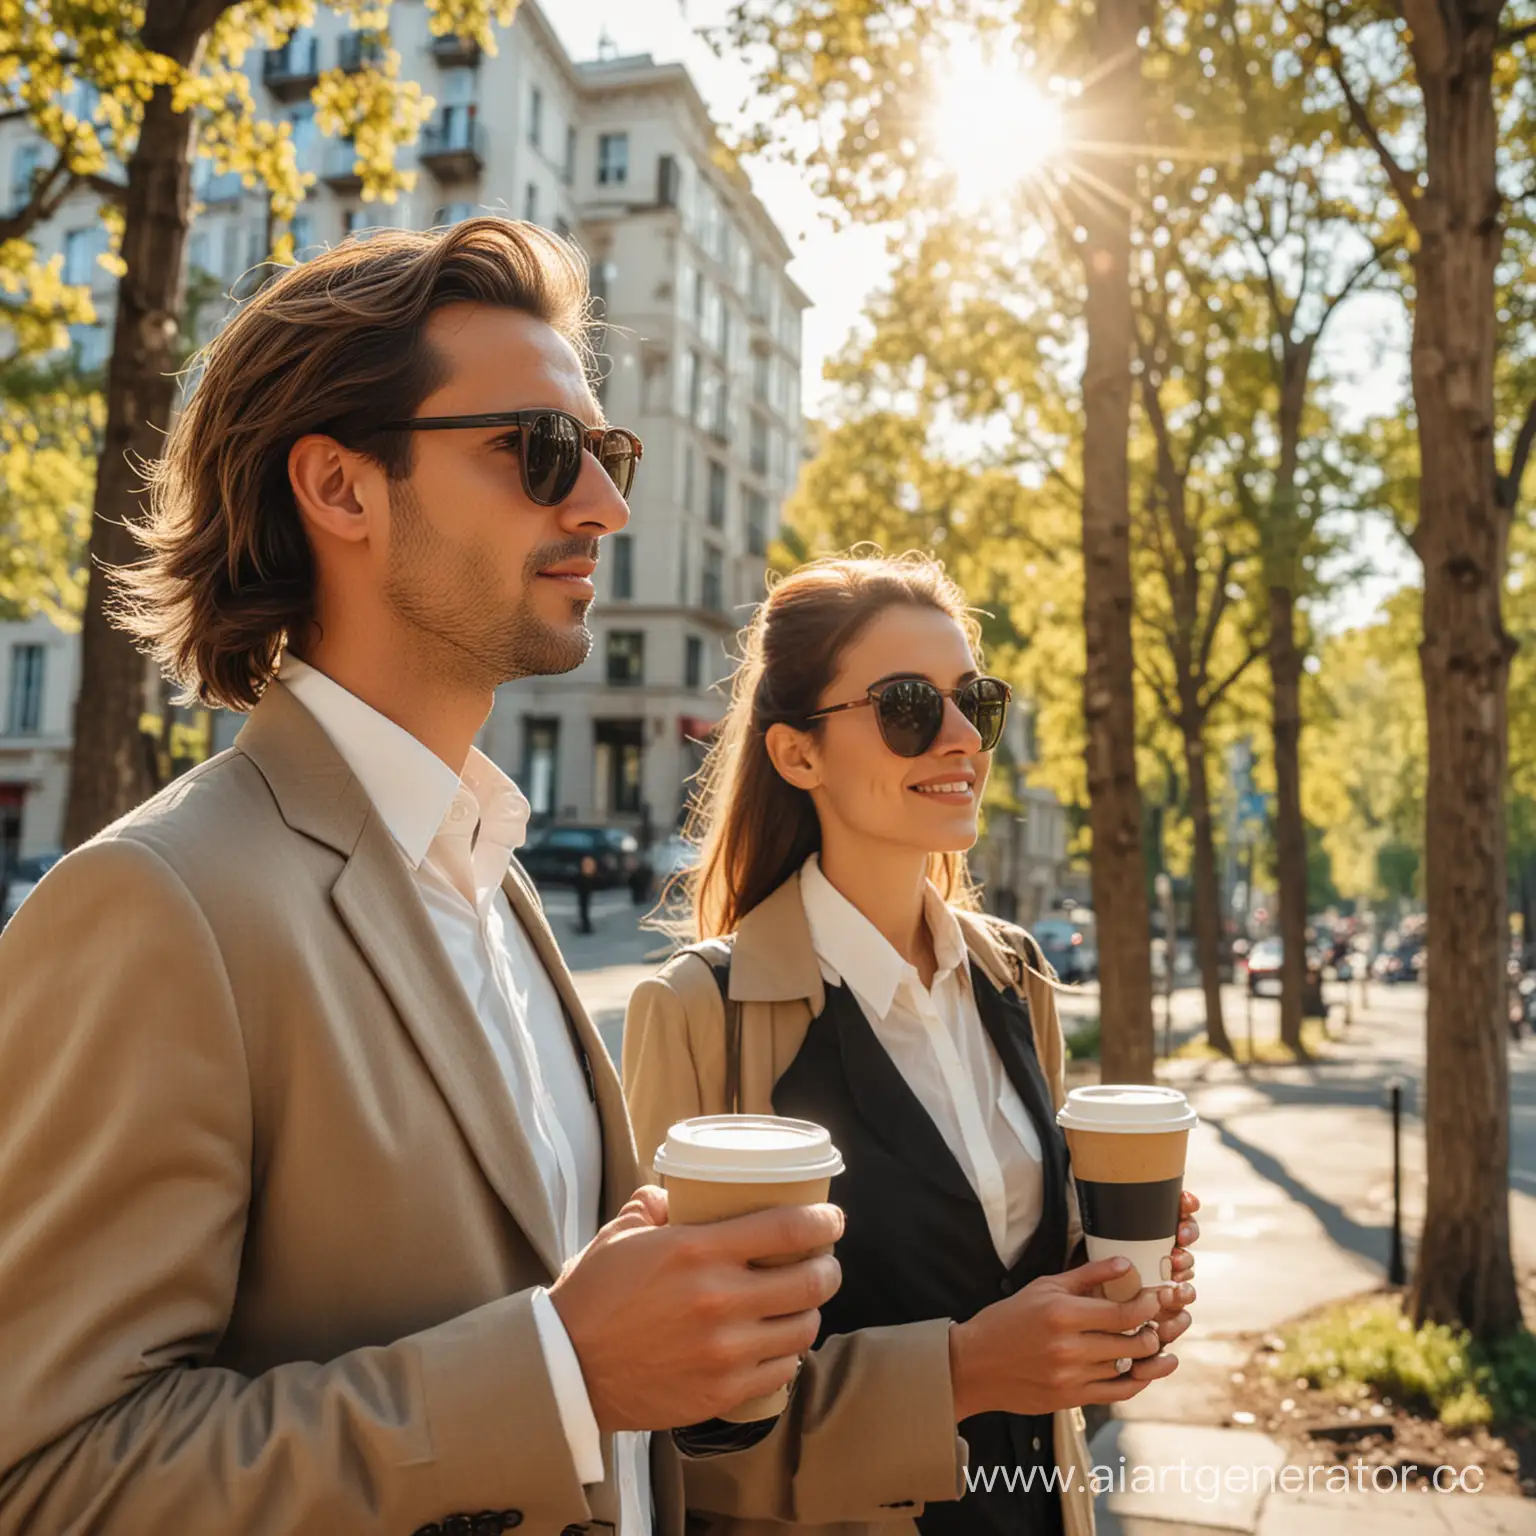 Urban-Professionals-Enjoying-Morning-Coffee-Break-with-Blurred-Cityscape-Background